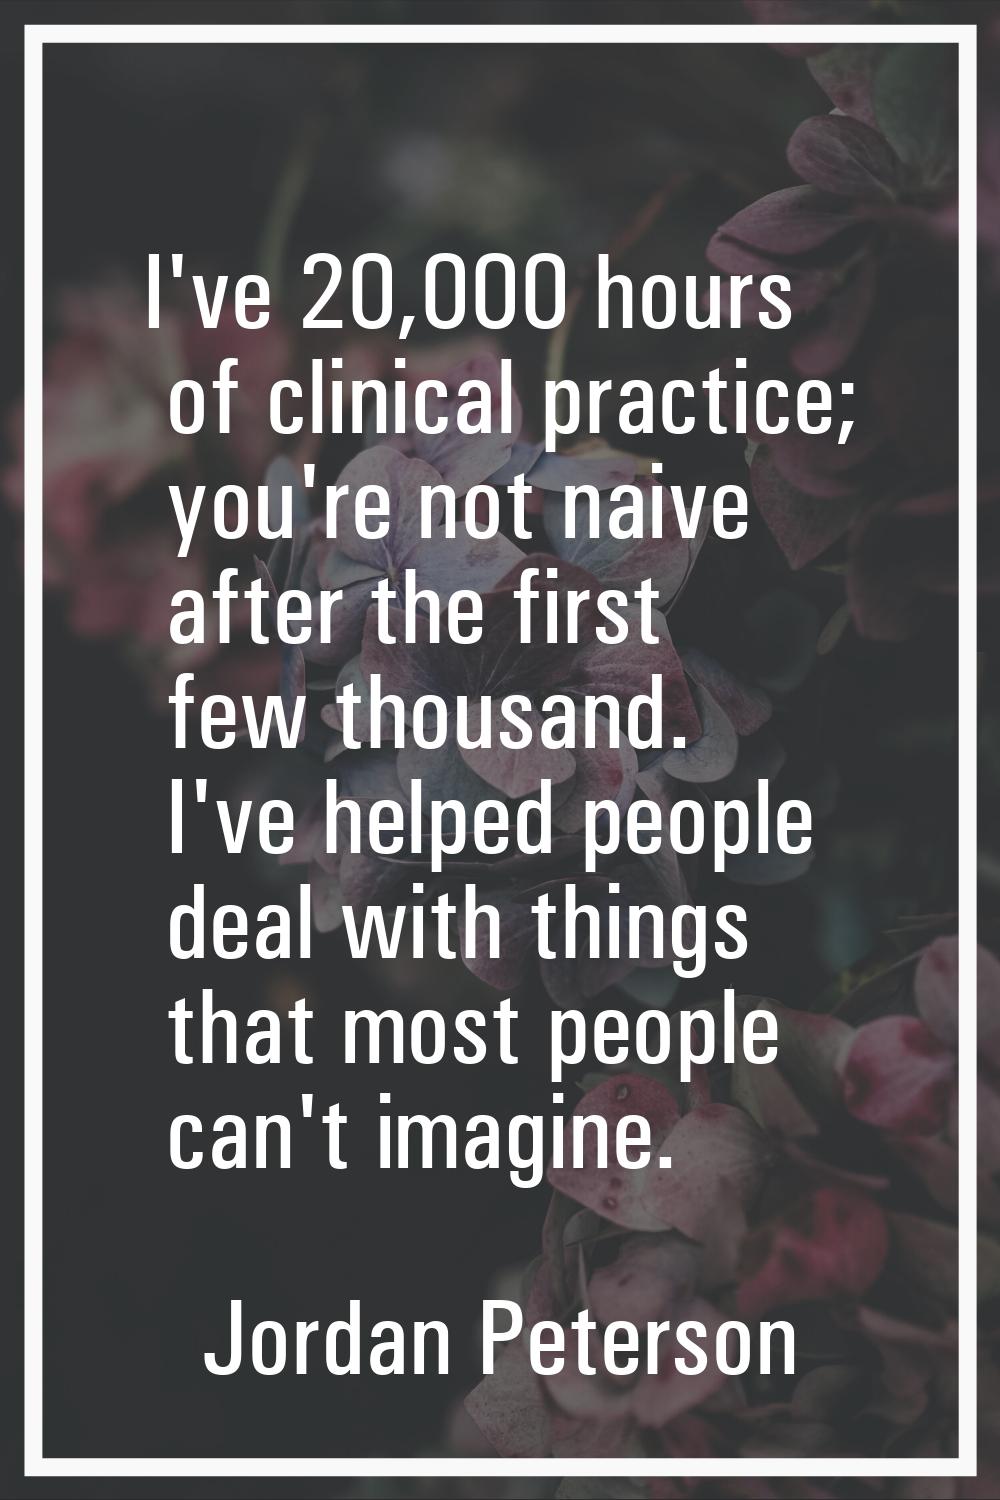 I've 20,000 hours of clinical practice; you're not naive after the first few thousand. I've helped 